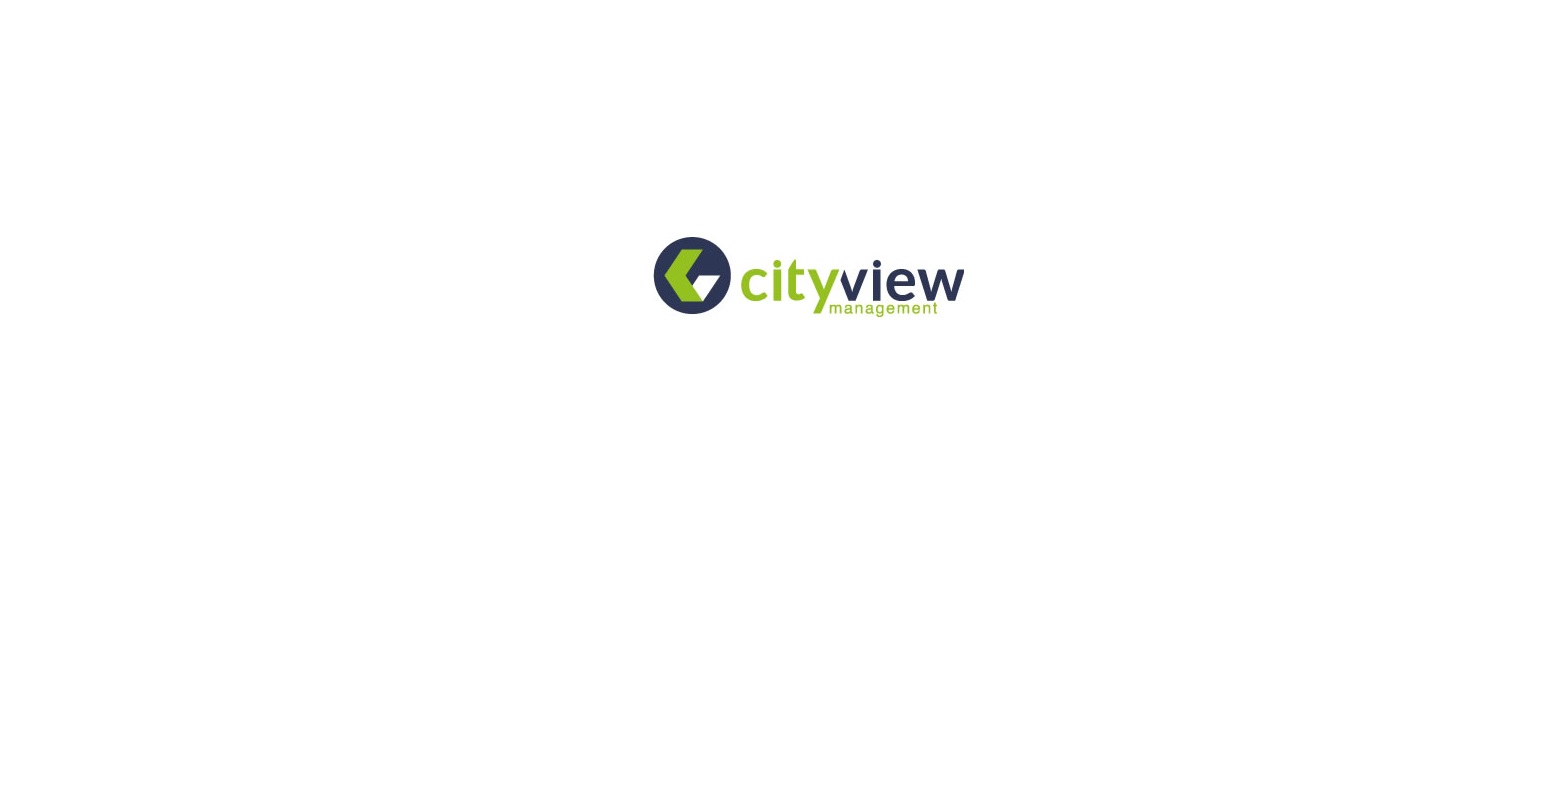 Logo of City View Property Management